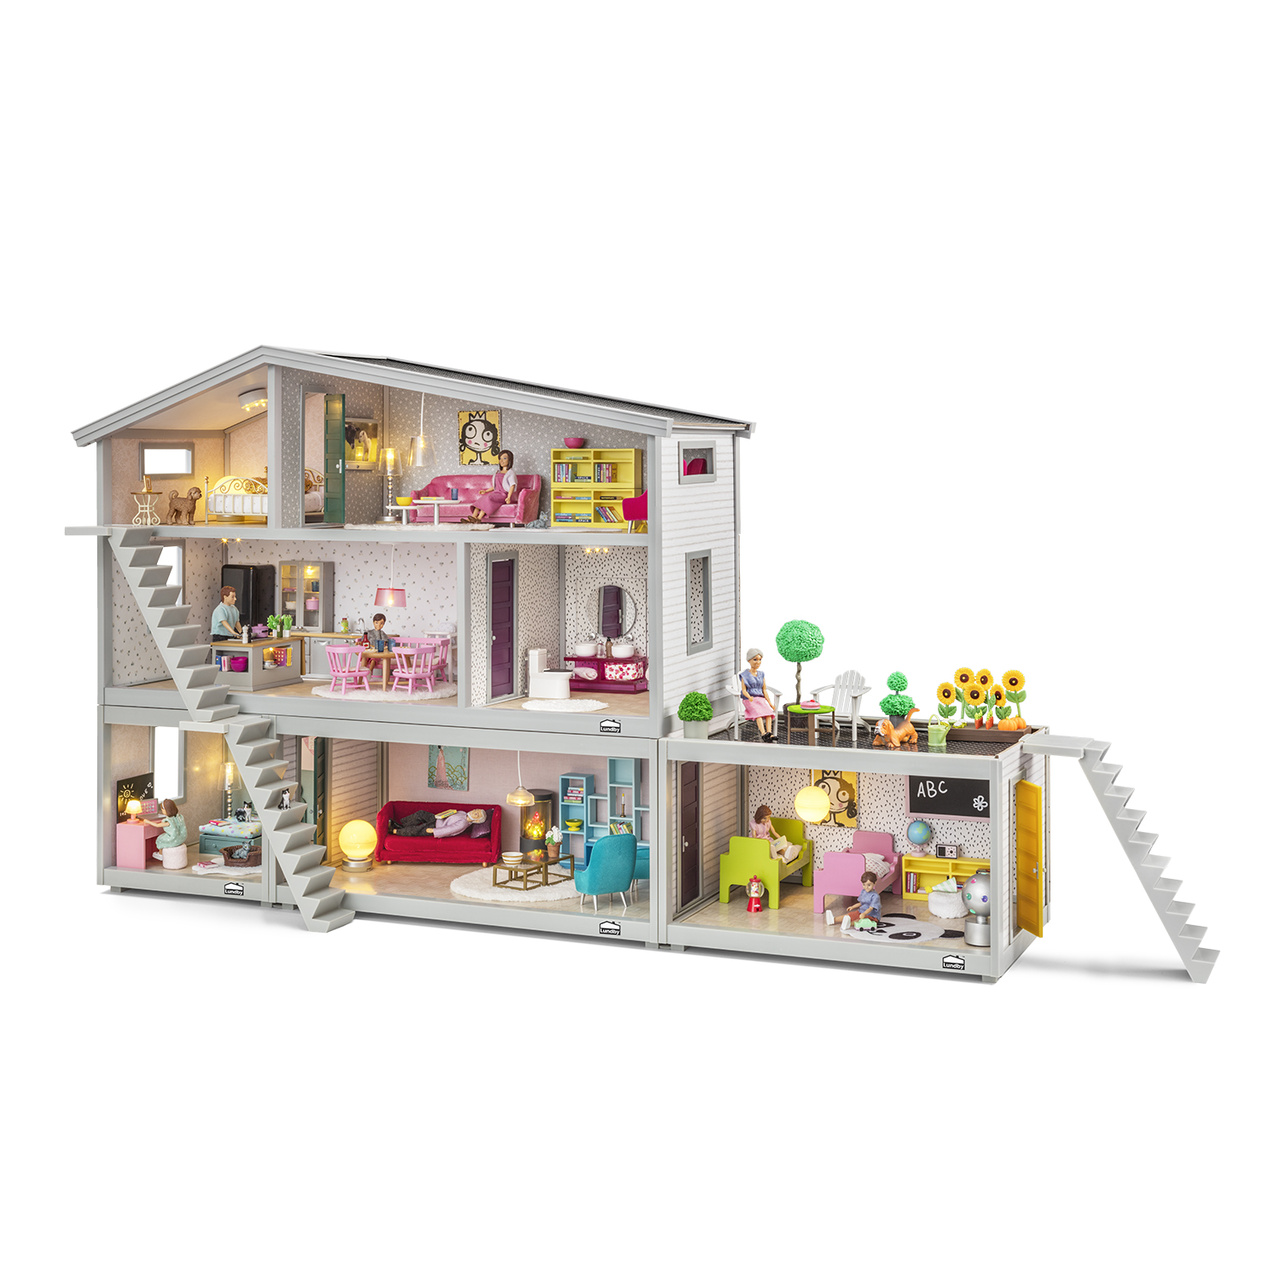 Lundby 60.1025 Doll's House Stairs for ROOM Puppenhaus Treppen 1:18 